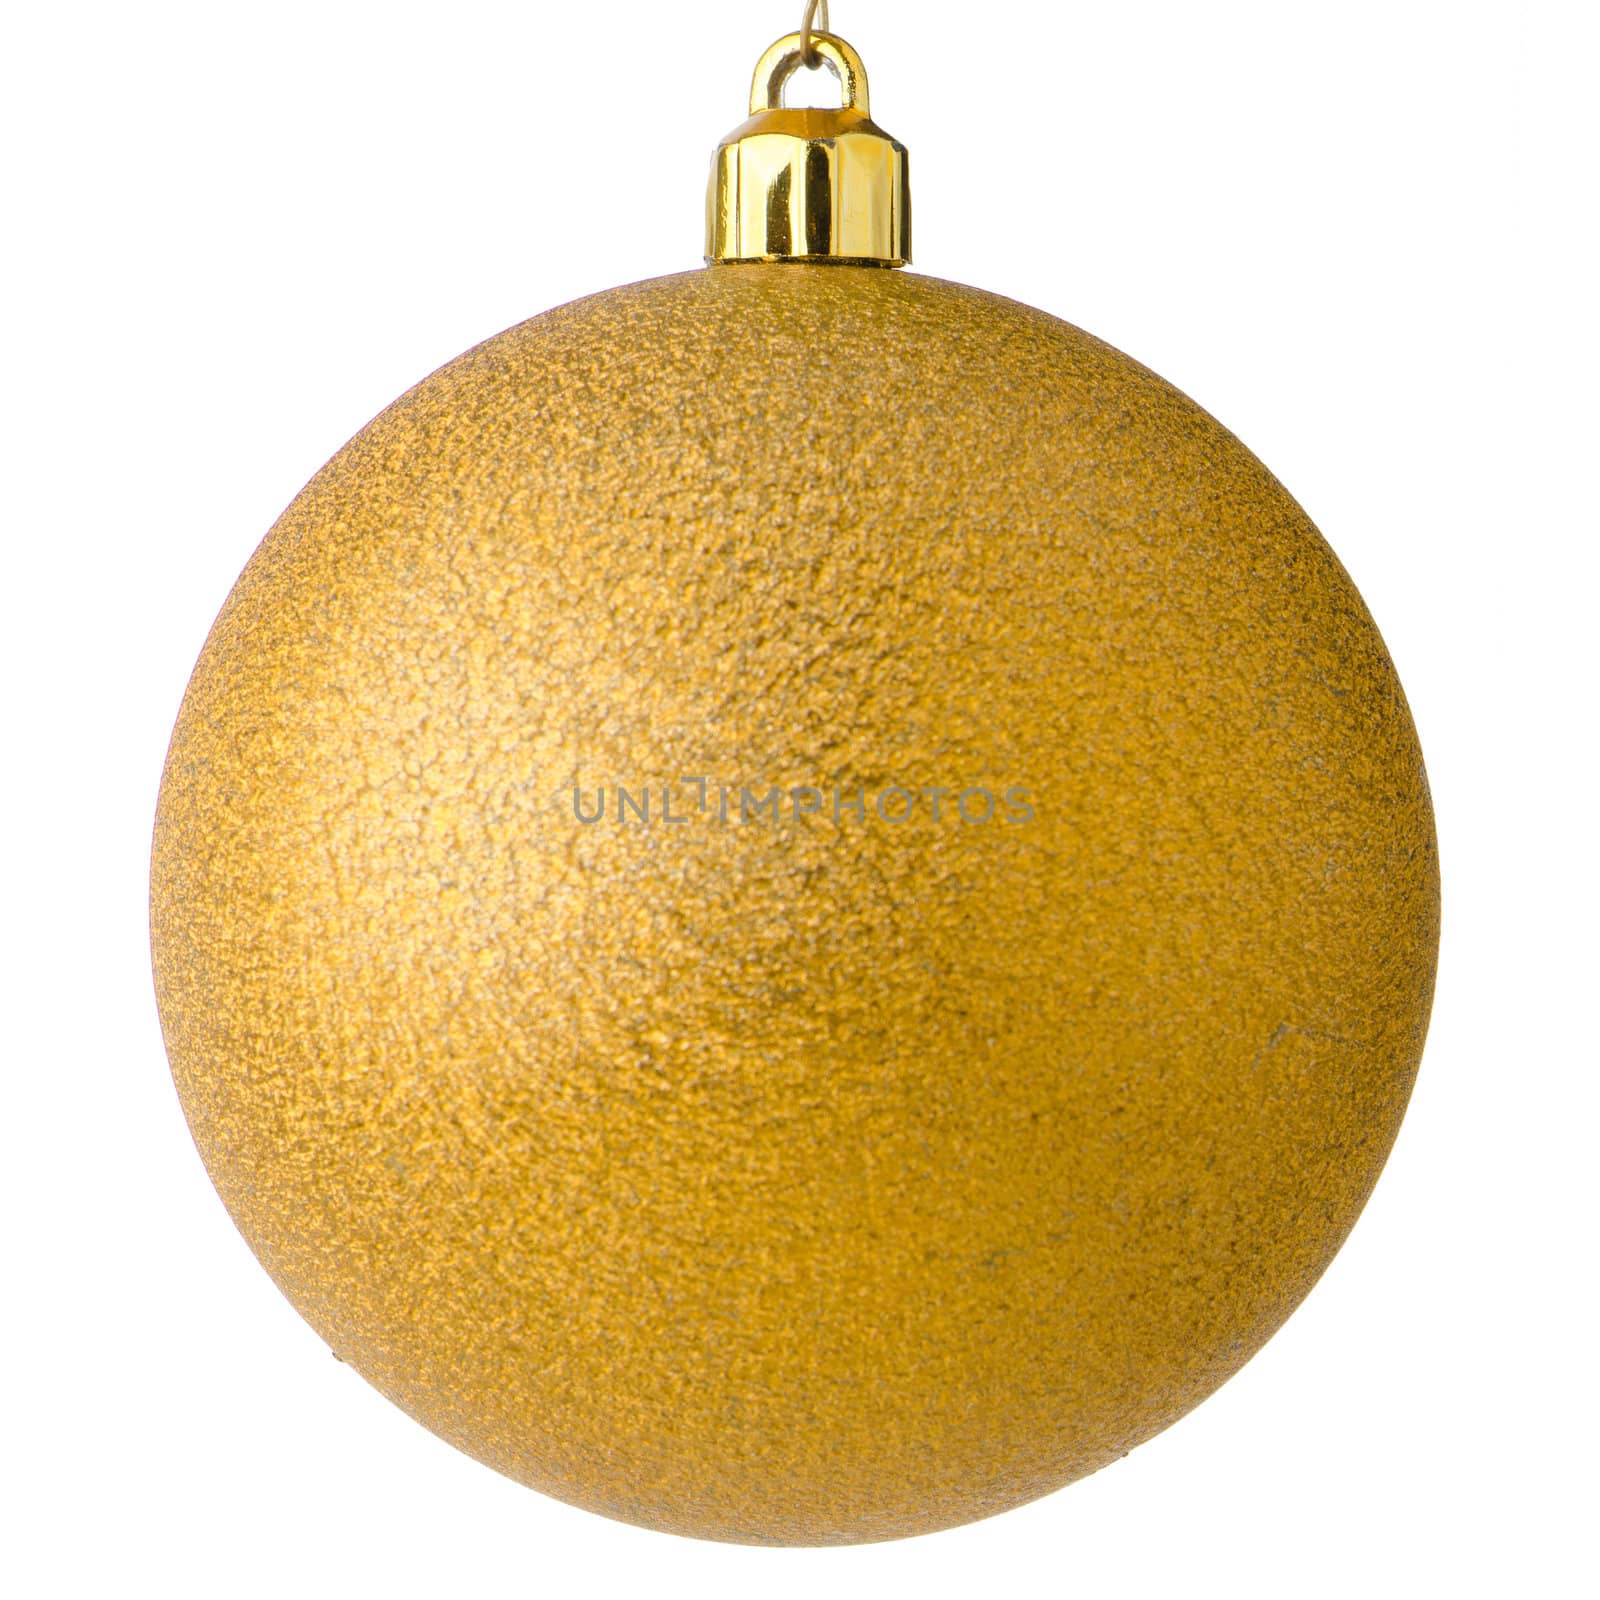 Yellow christmas ball isolated on white background.